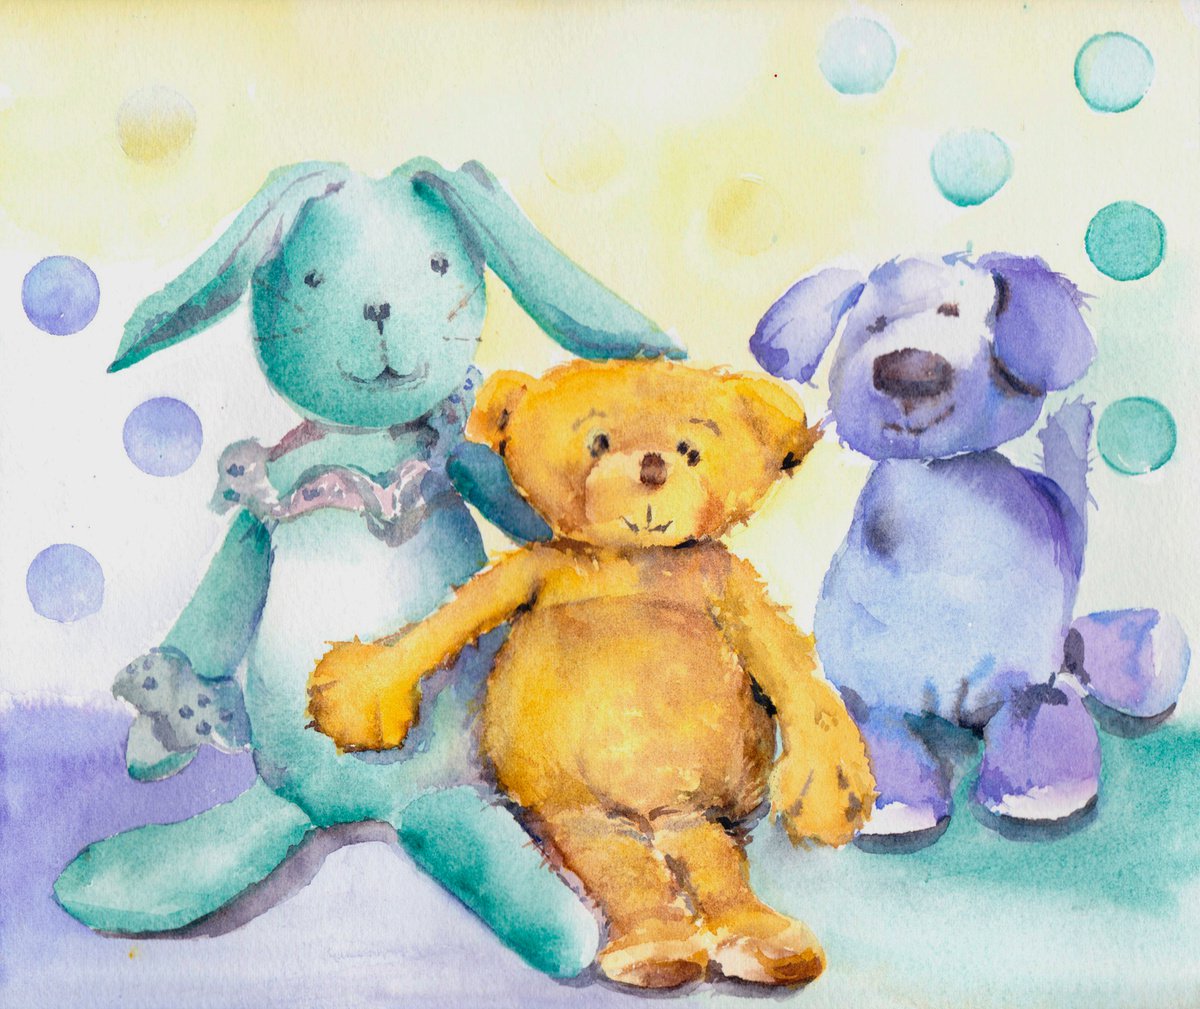 Teddy and friends, Original watercolour painting by Anjana Cawdell